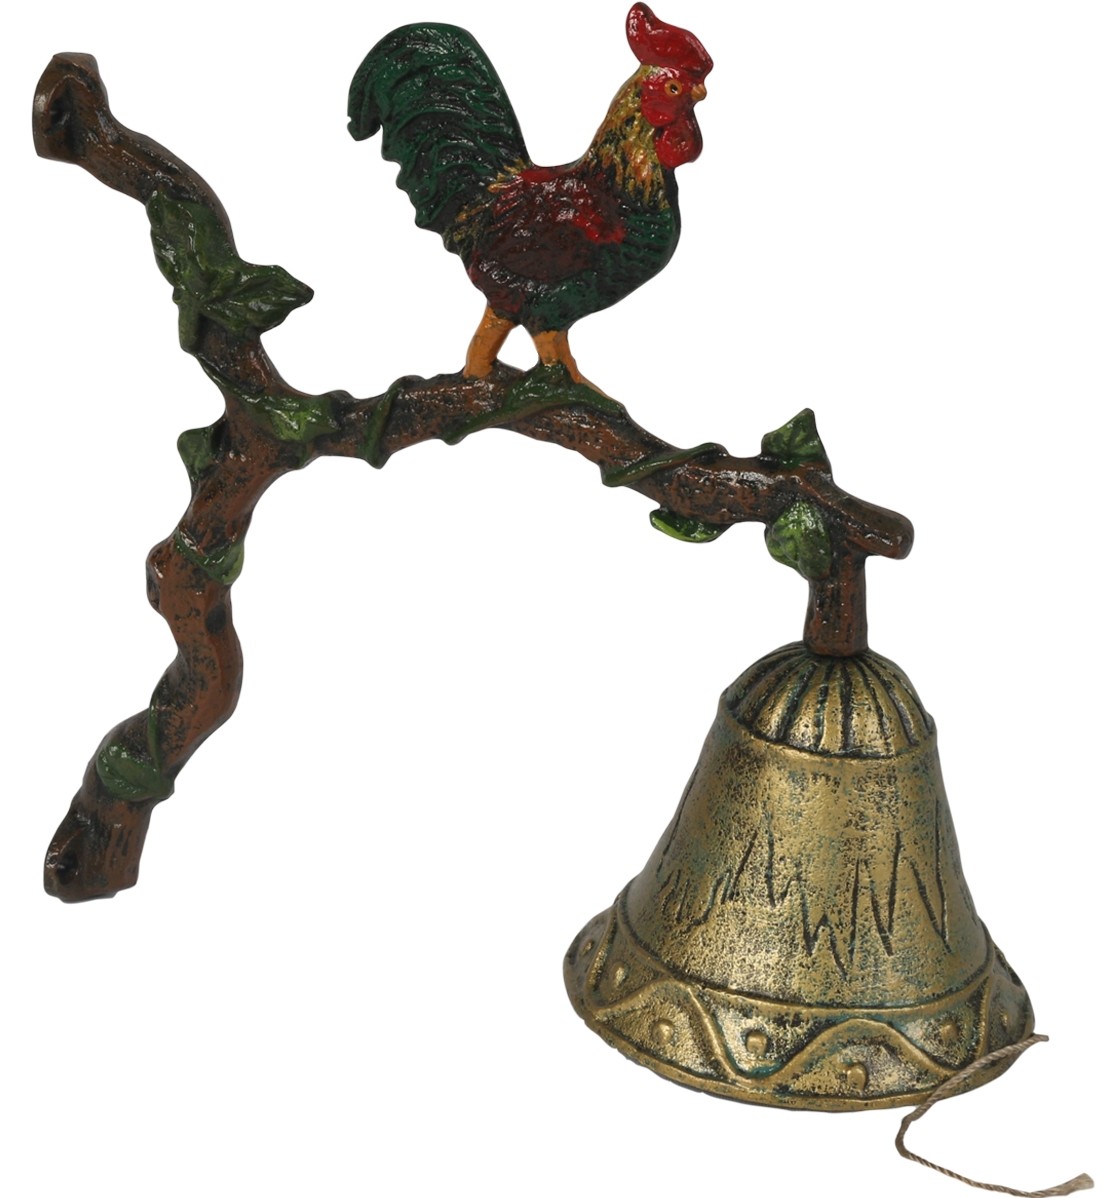 Cast Iron Rooster Bell 21cm